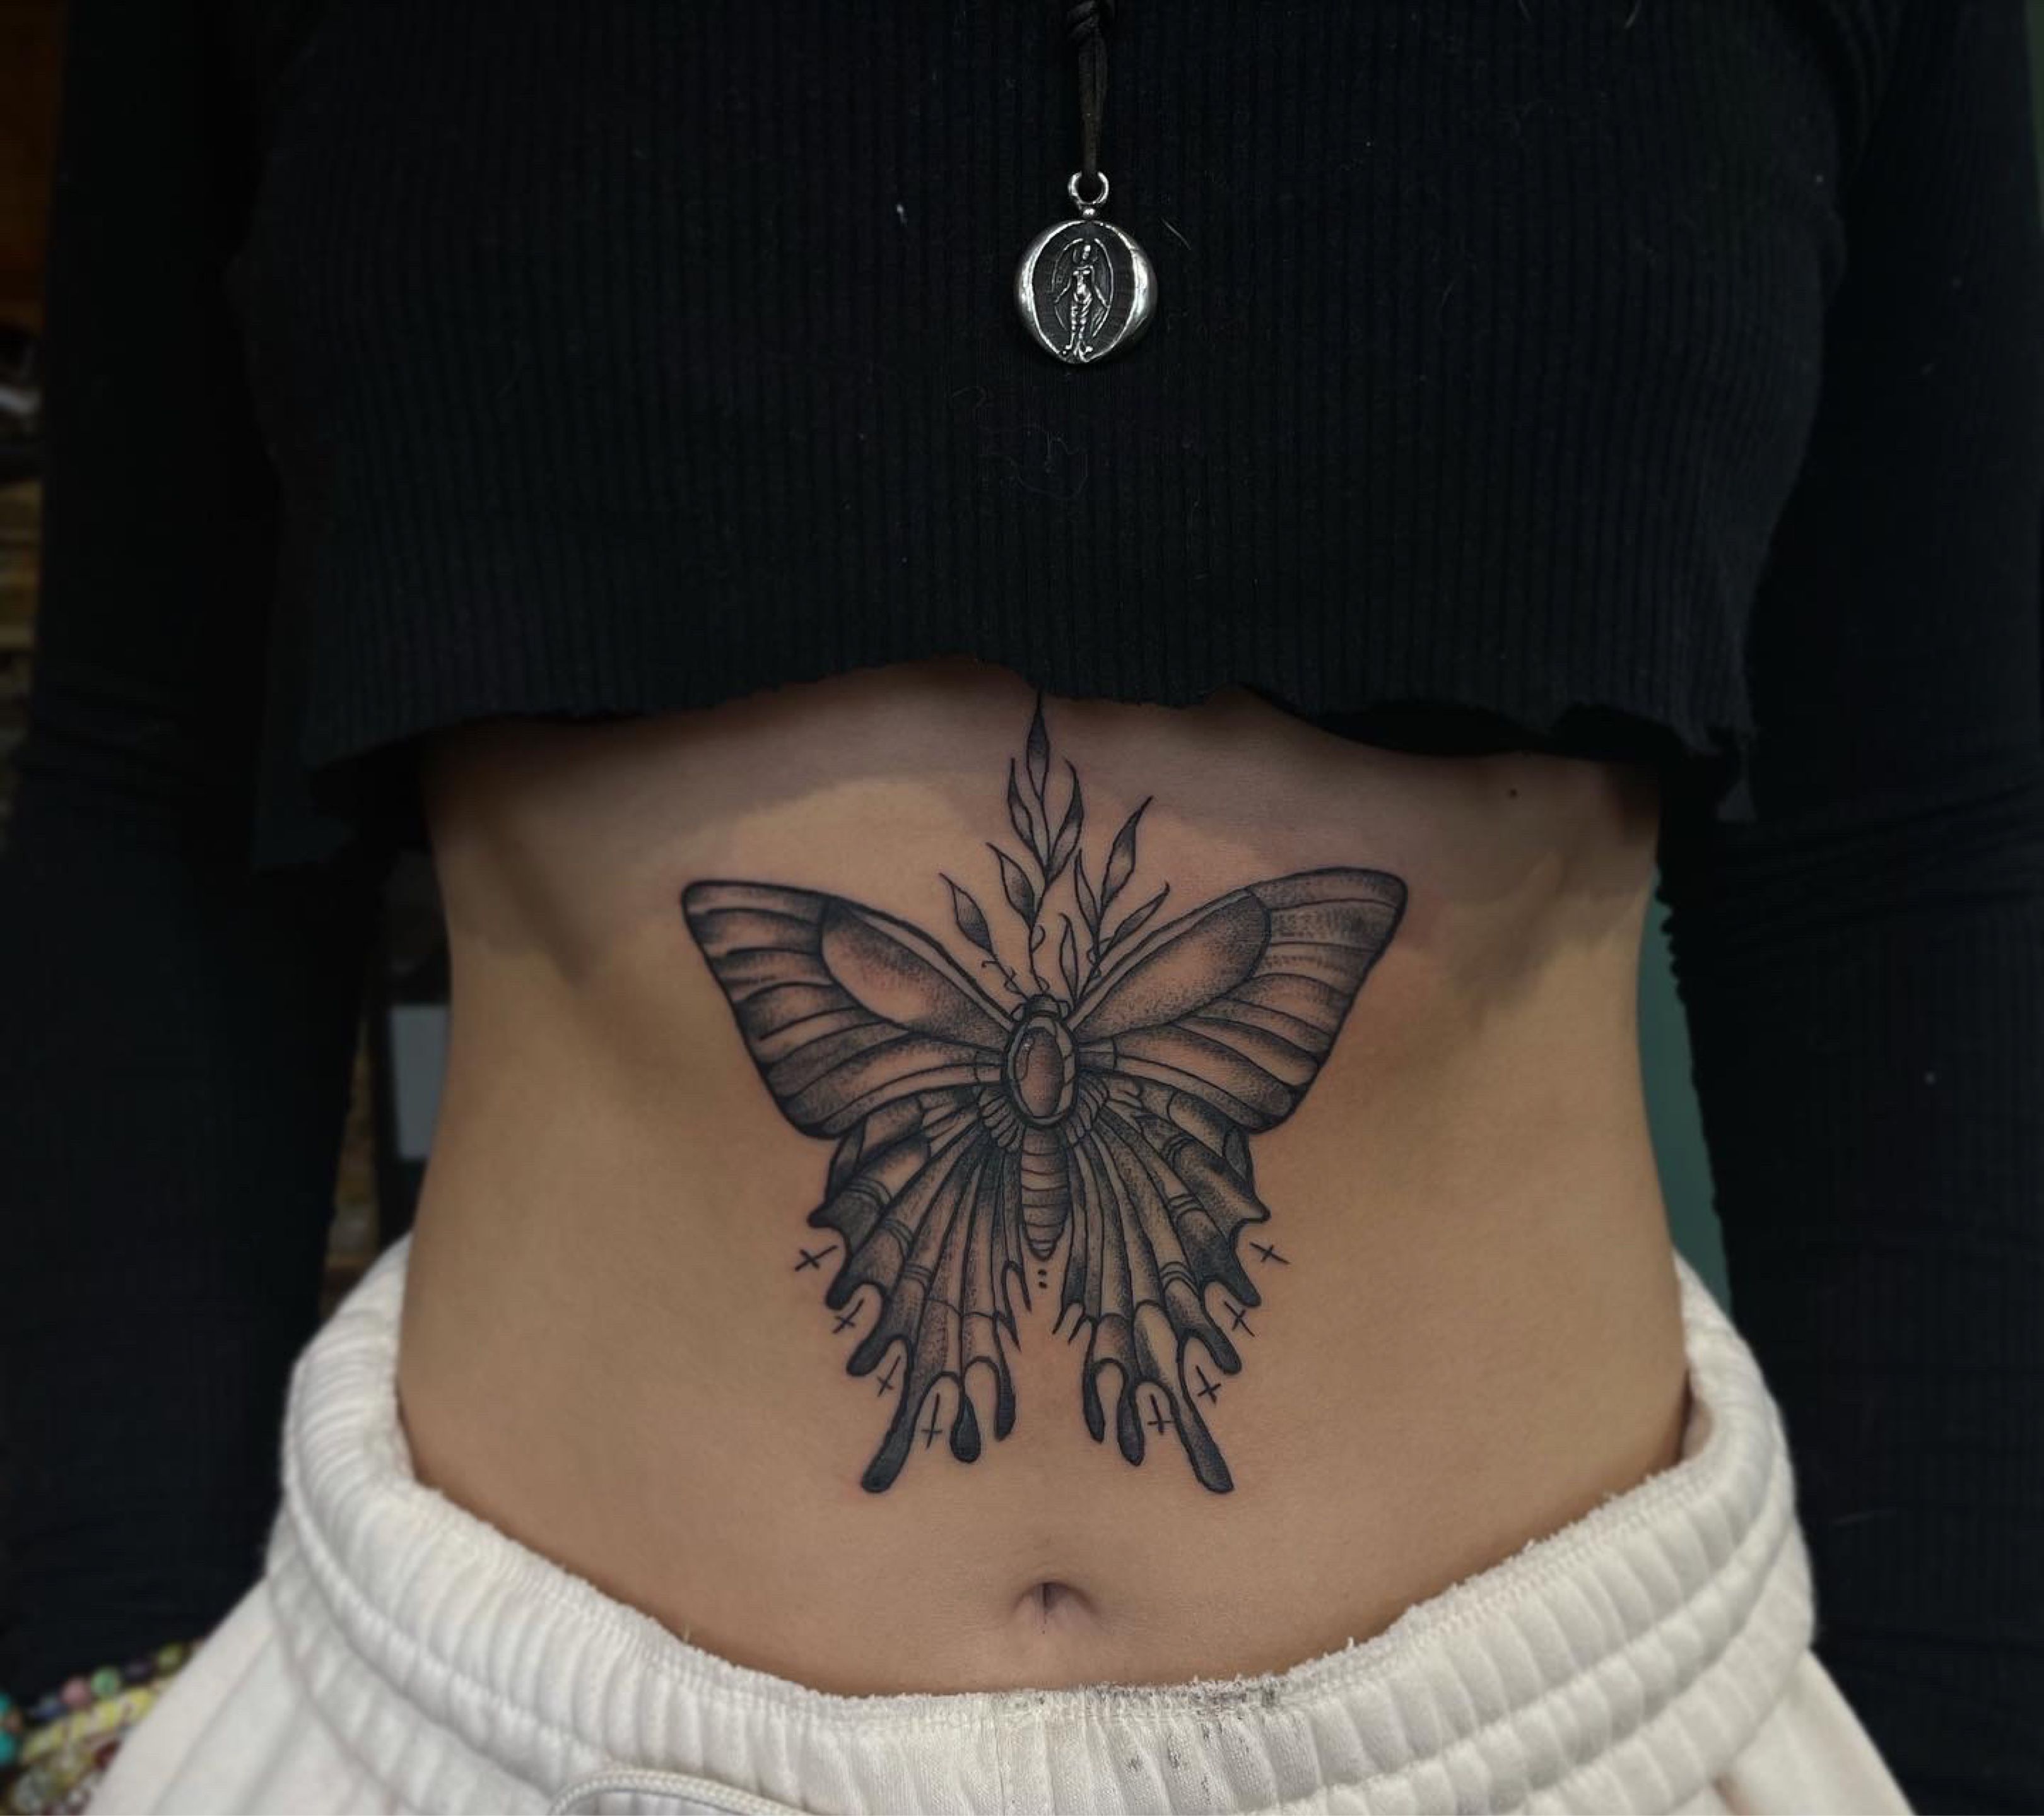 File:Woman with four star tattoos on her belly, and a navel piercing.jpg -  Wikipedia